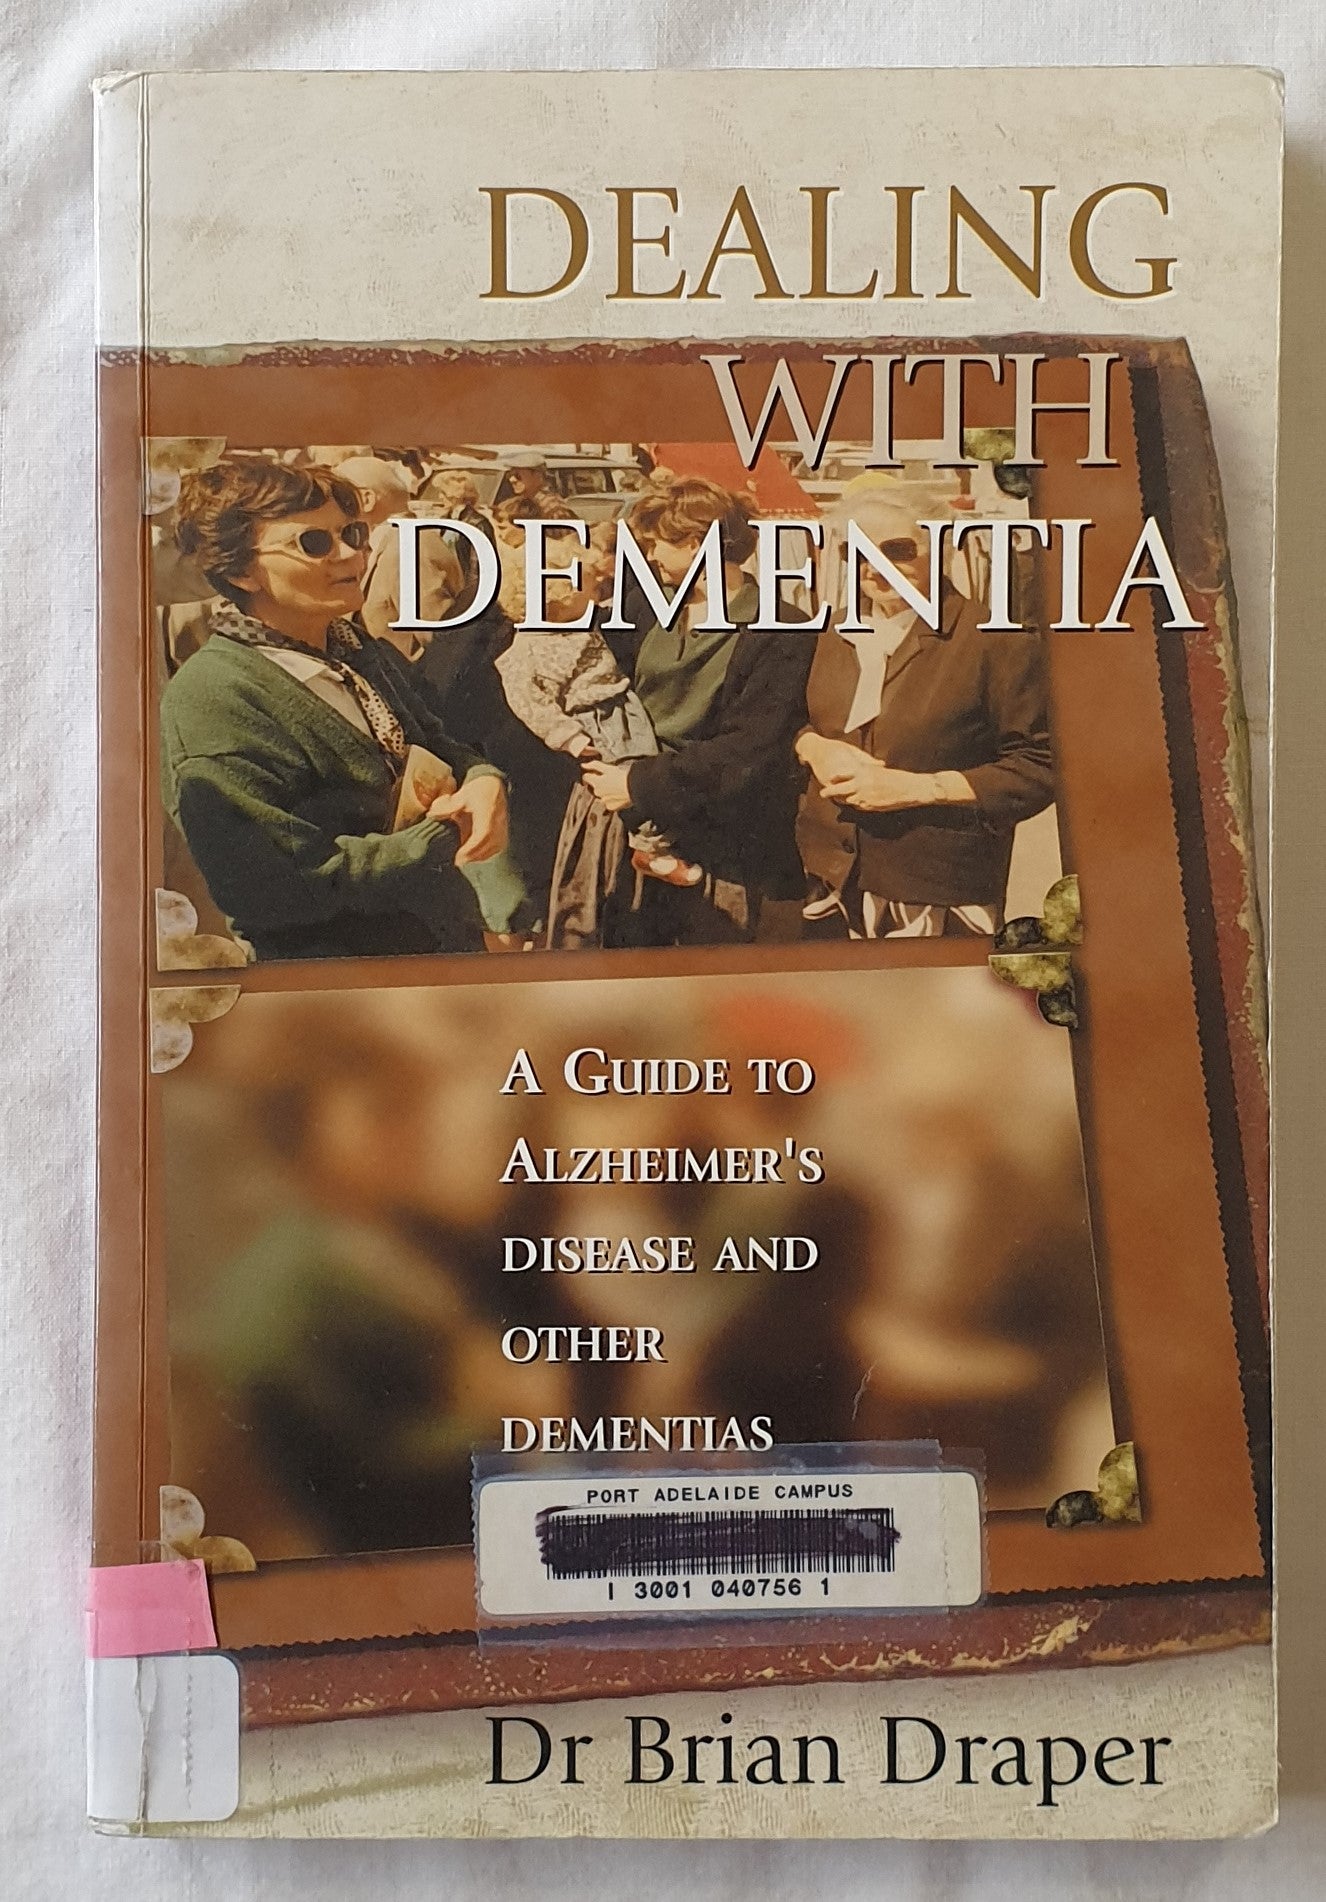 Dealing with Dementia by Brian Draper